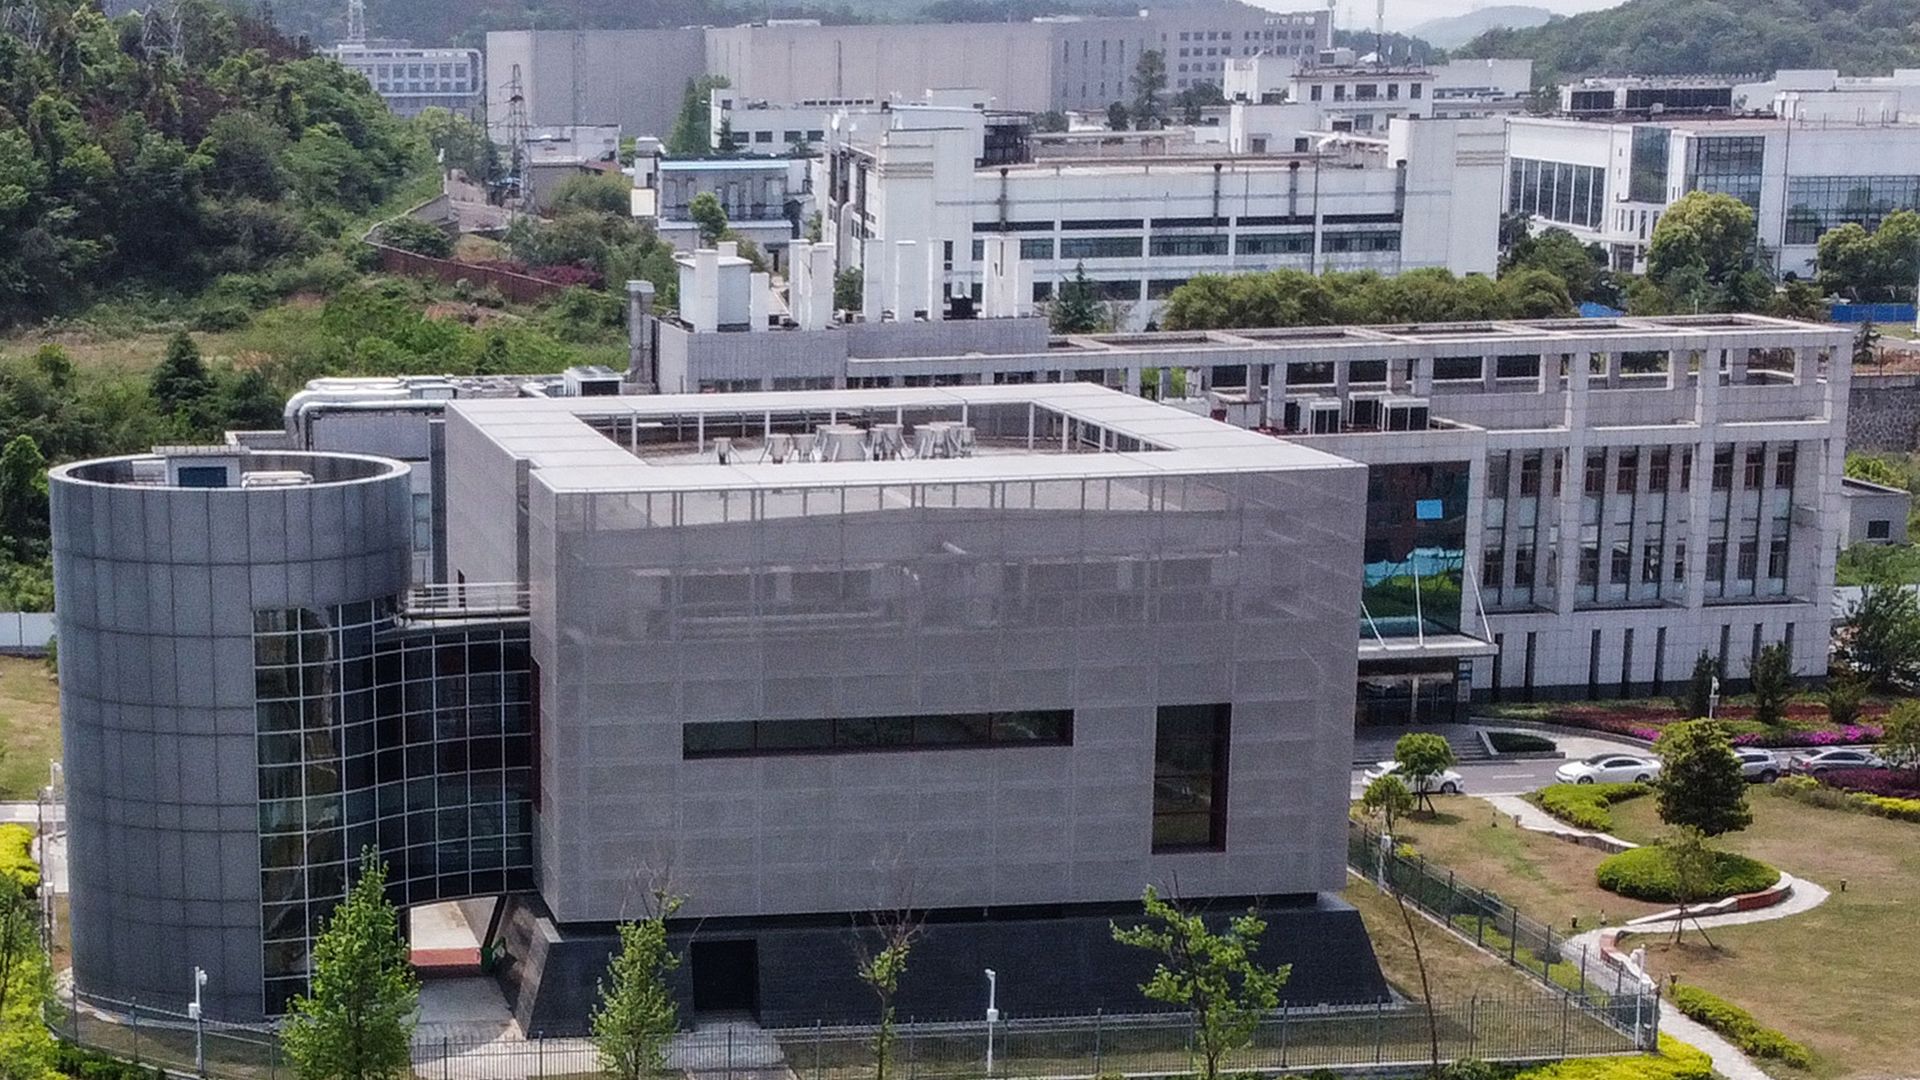 An aerial view of the Wuhan Institute of Virology.